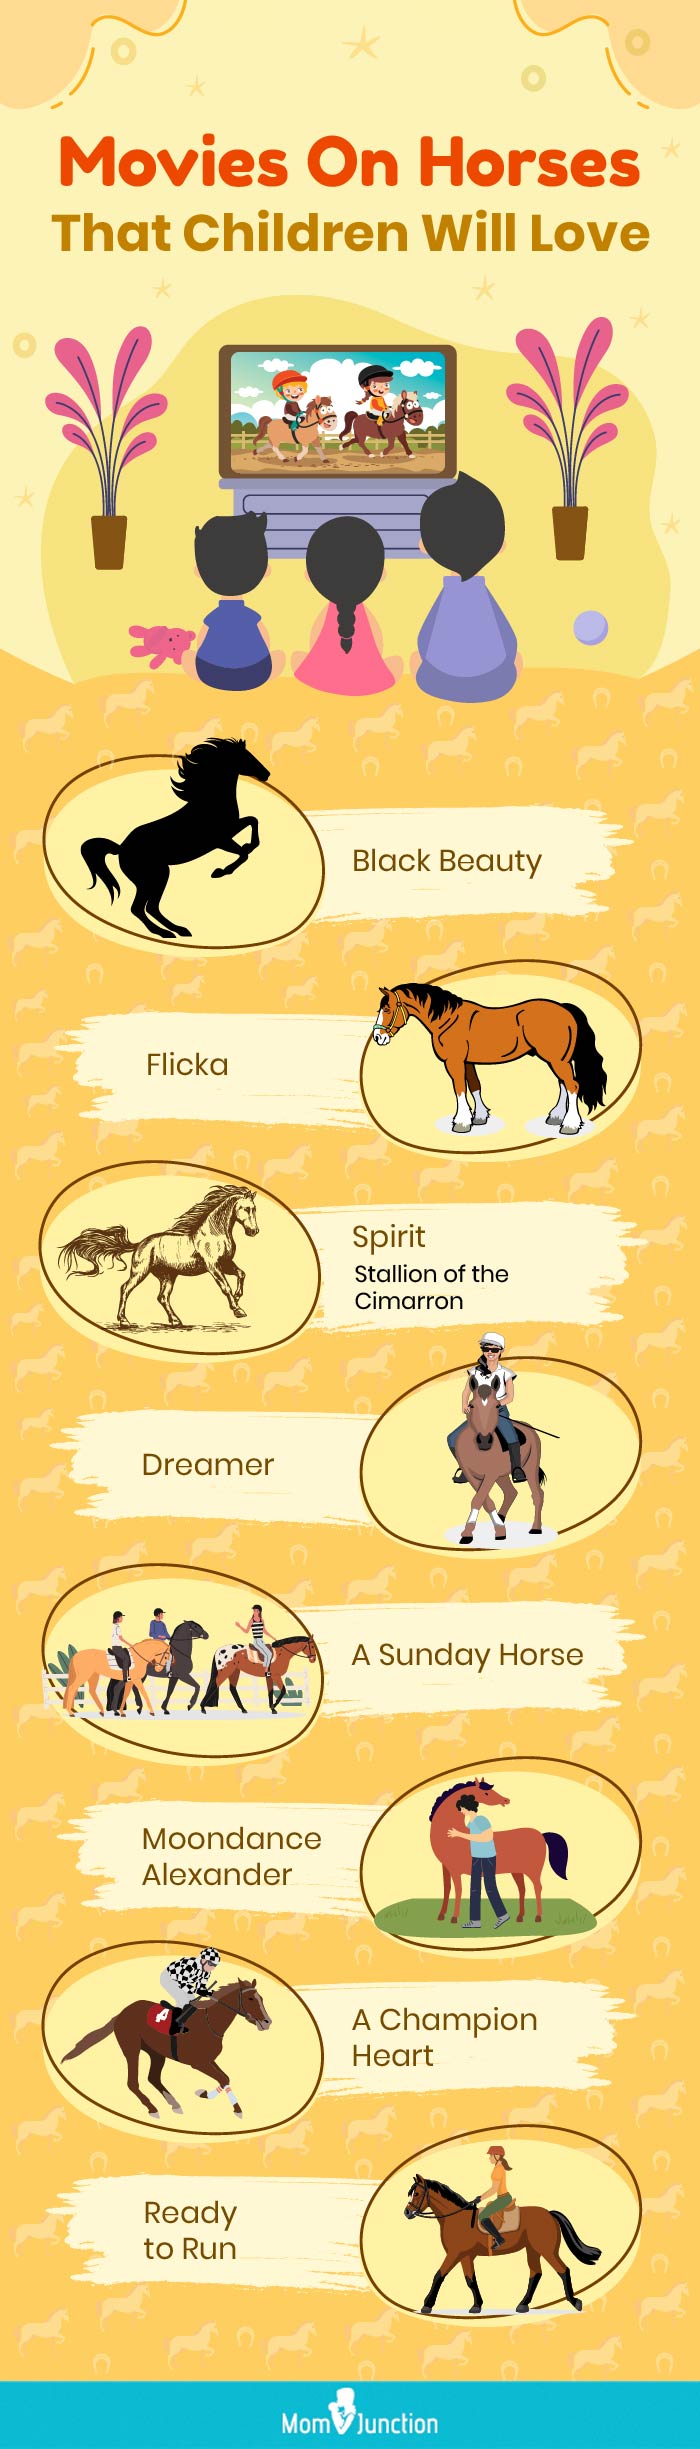 movies on horses that children will love (infographic)